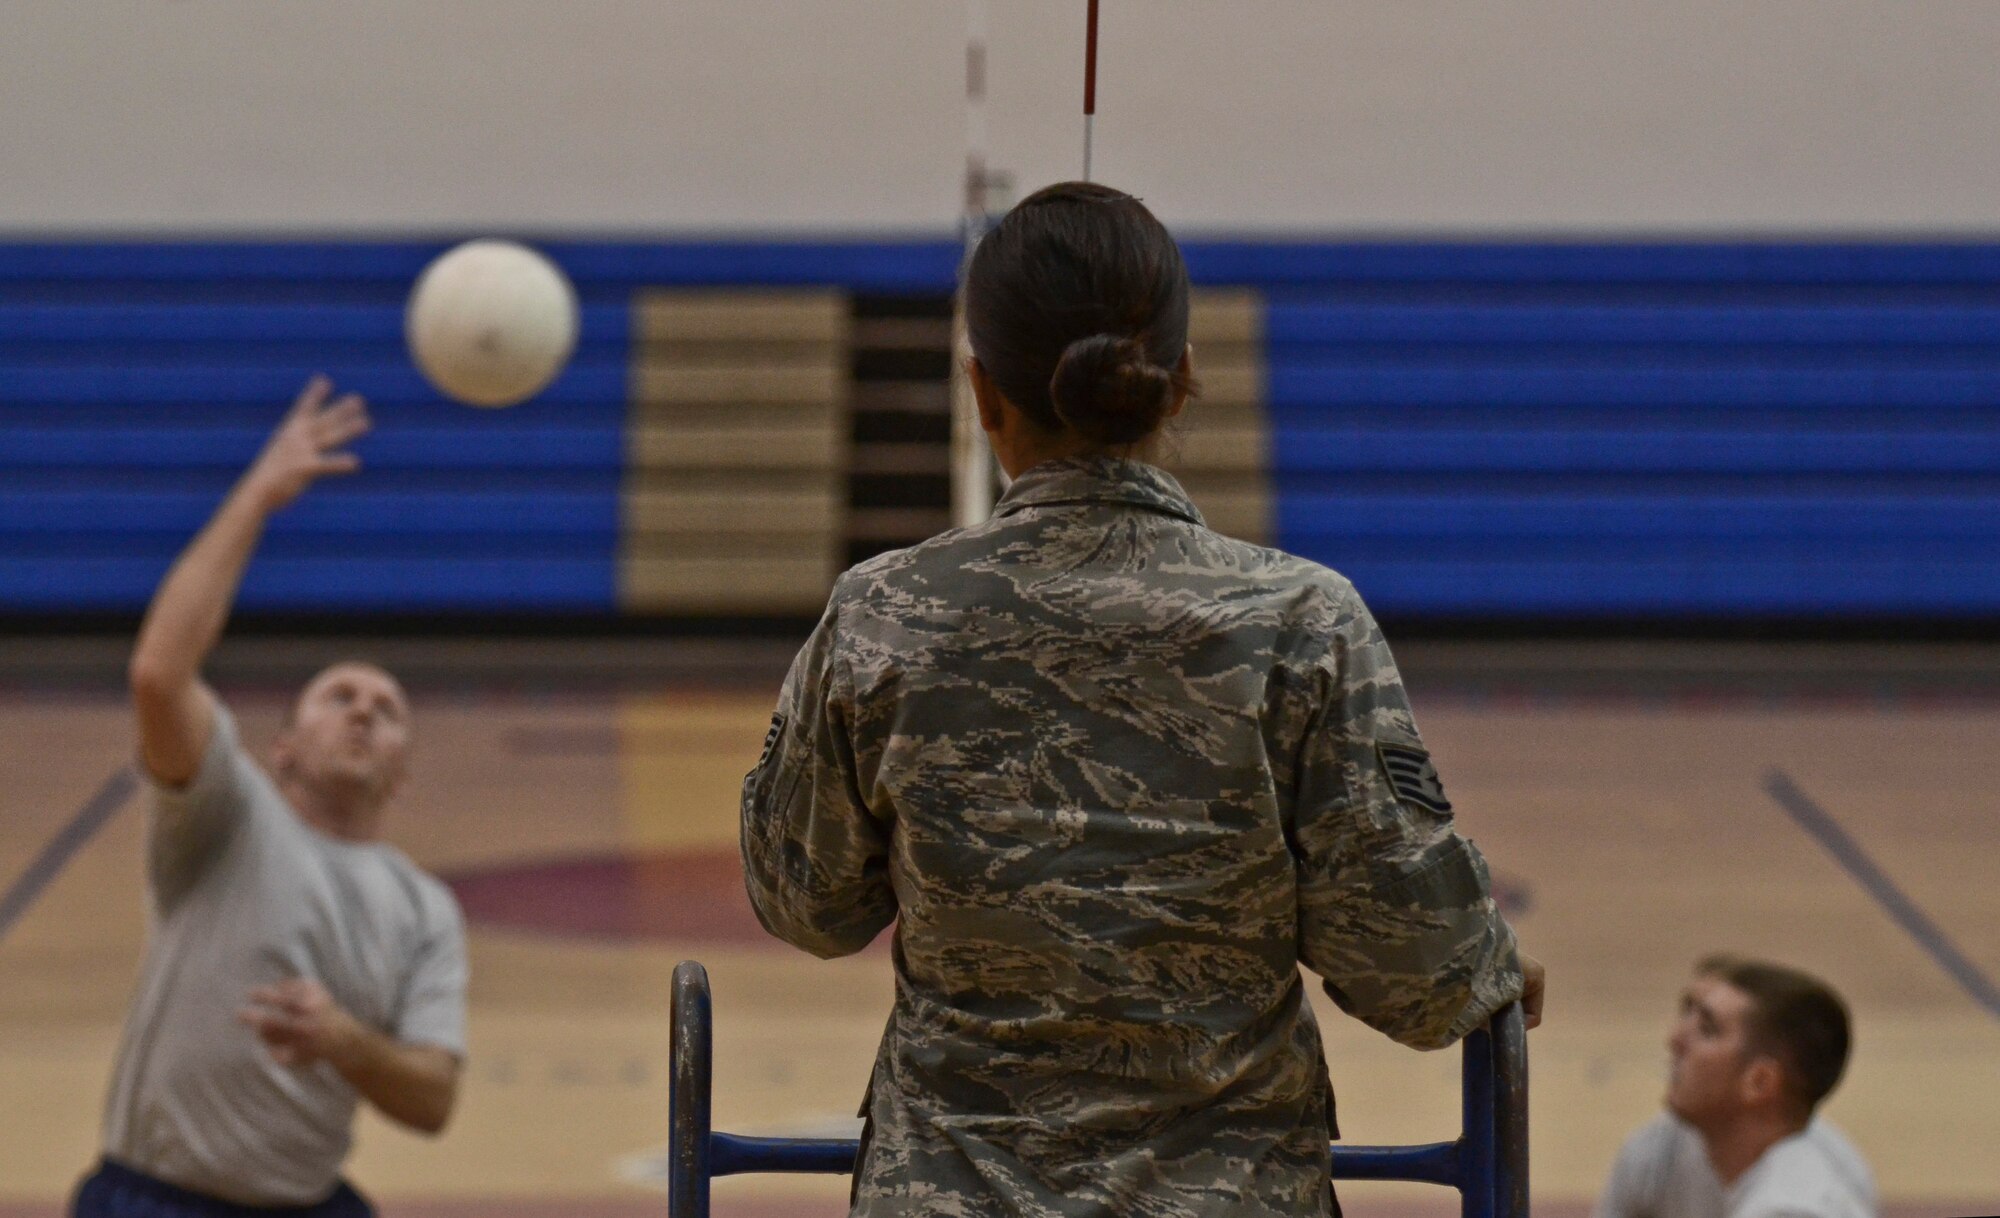 Staff Sgt. Kamaile Long, 36th Force Support Squadron Airman Leadership School instructor, referees a volleyball game Dec. 2, 2013, at the Coral Reef Fitness Center on Andersen Air Force Base, Guam. The “ALS versus Shirts” volleyball game between ALS students and first sergeants is an Air Force-wide tradition. The 36th Wing first sergeants defeated the ALS students, 3-1 sets. (U.S. Air Force photo by Senior Airman Marianique Santos/Released)